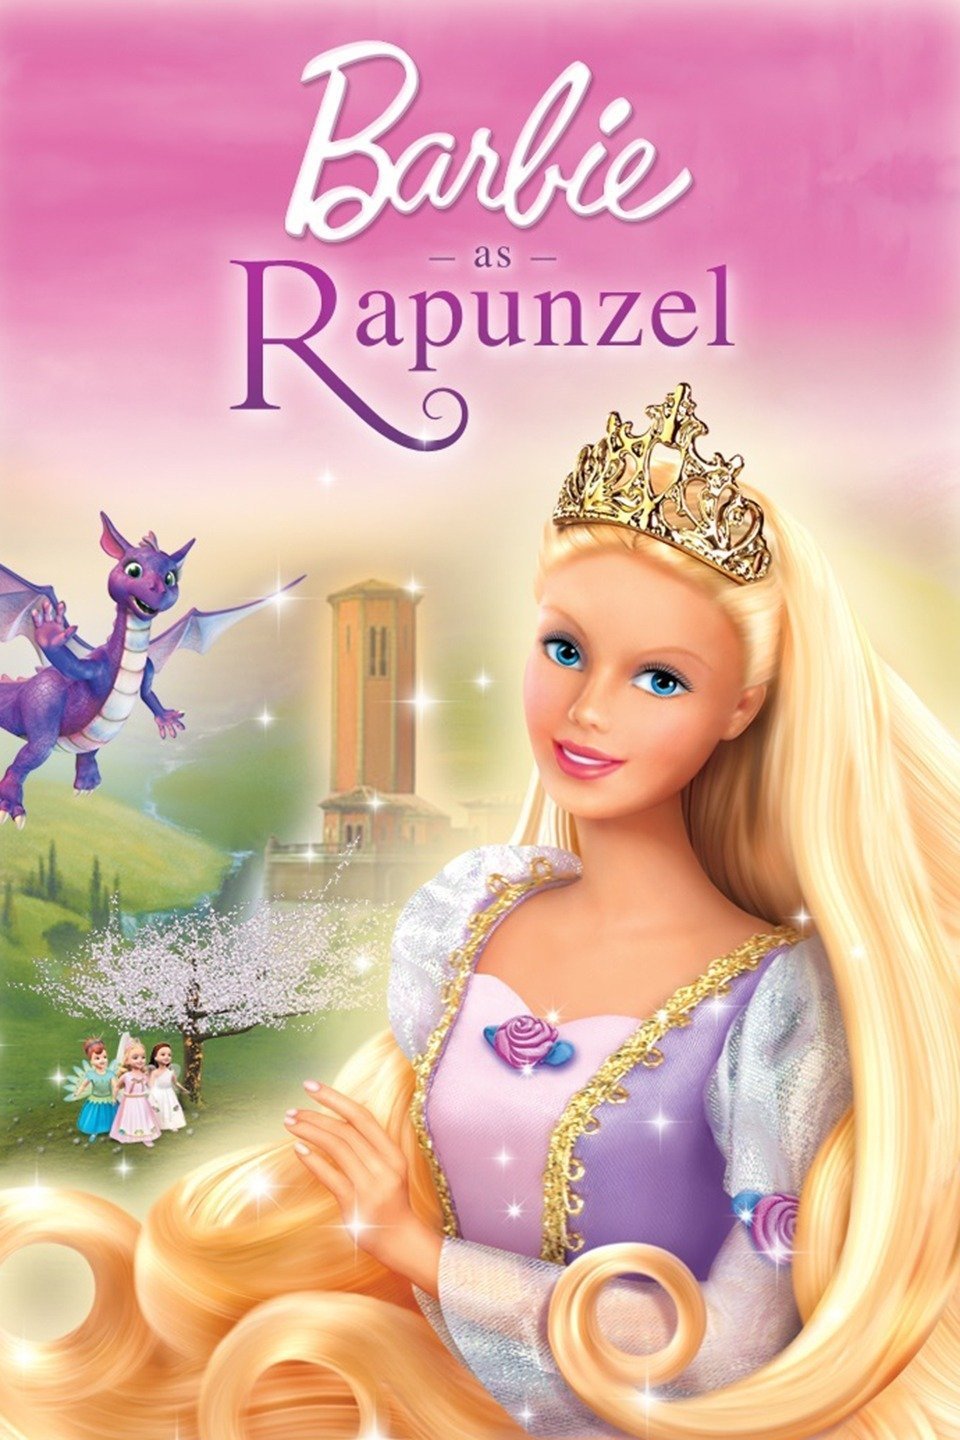 Poster of the movie Barbie as Rapunzel